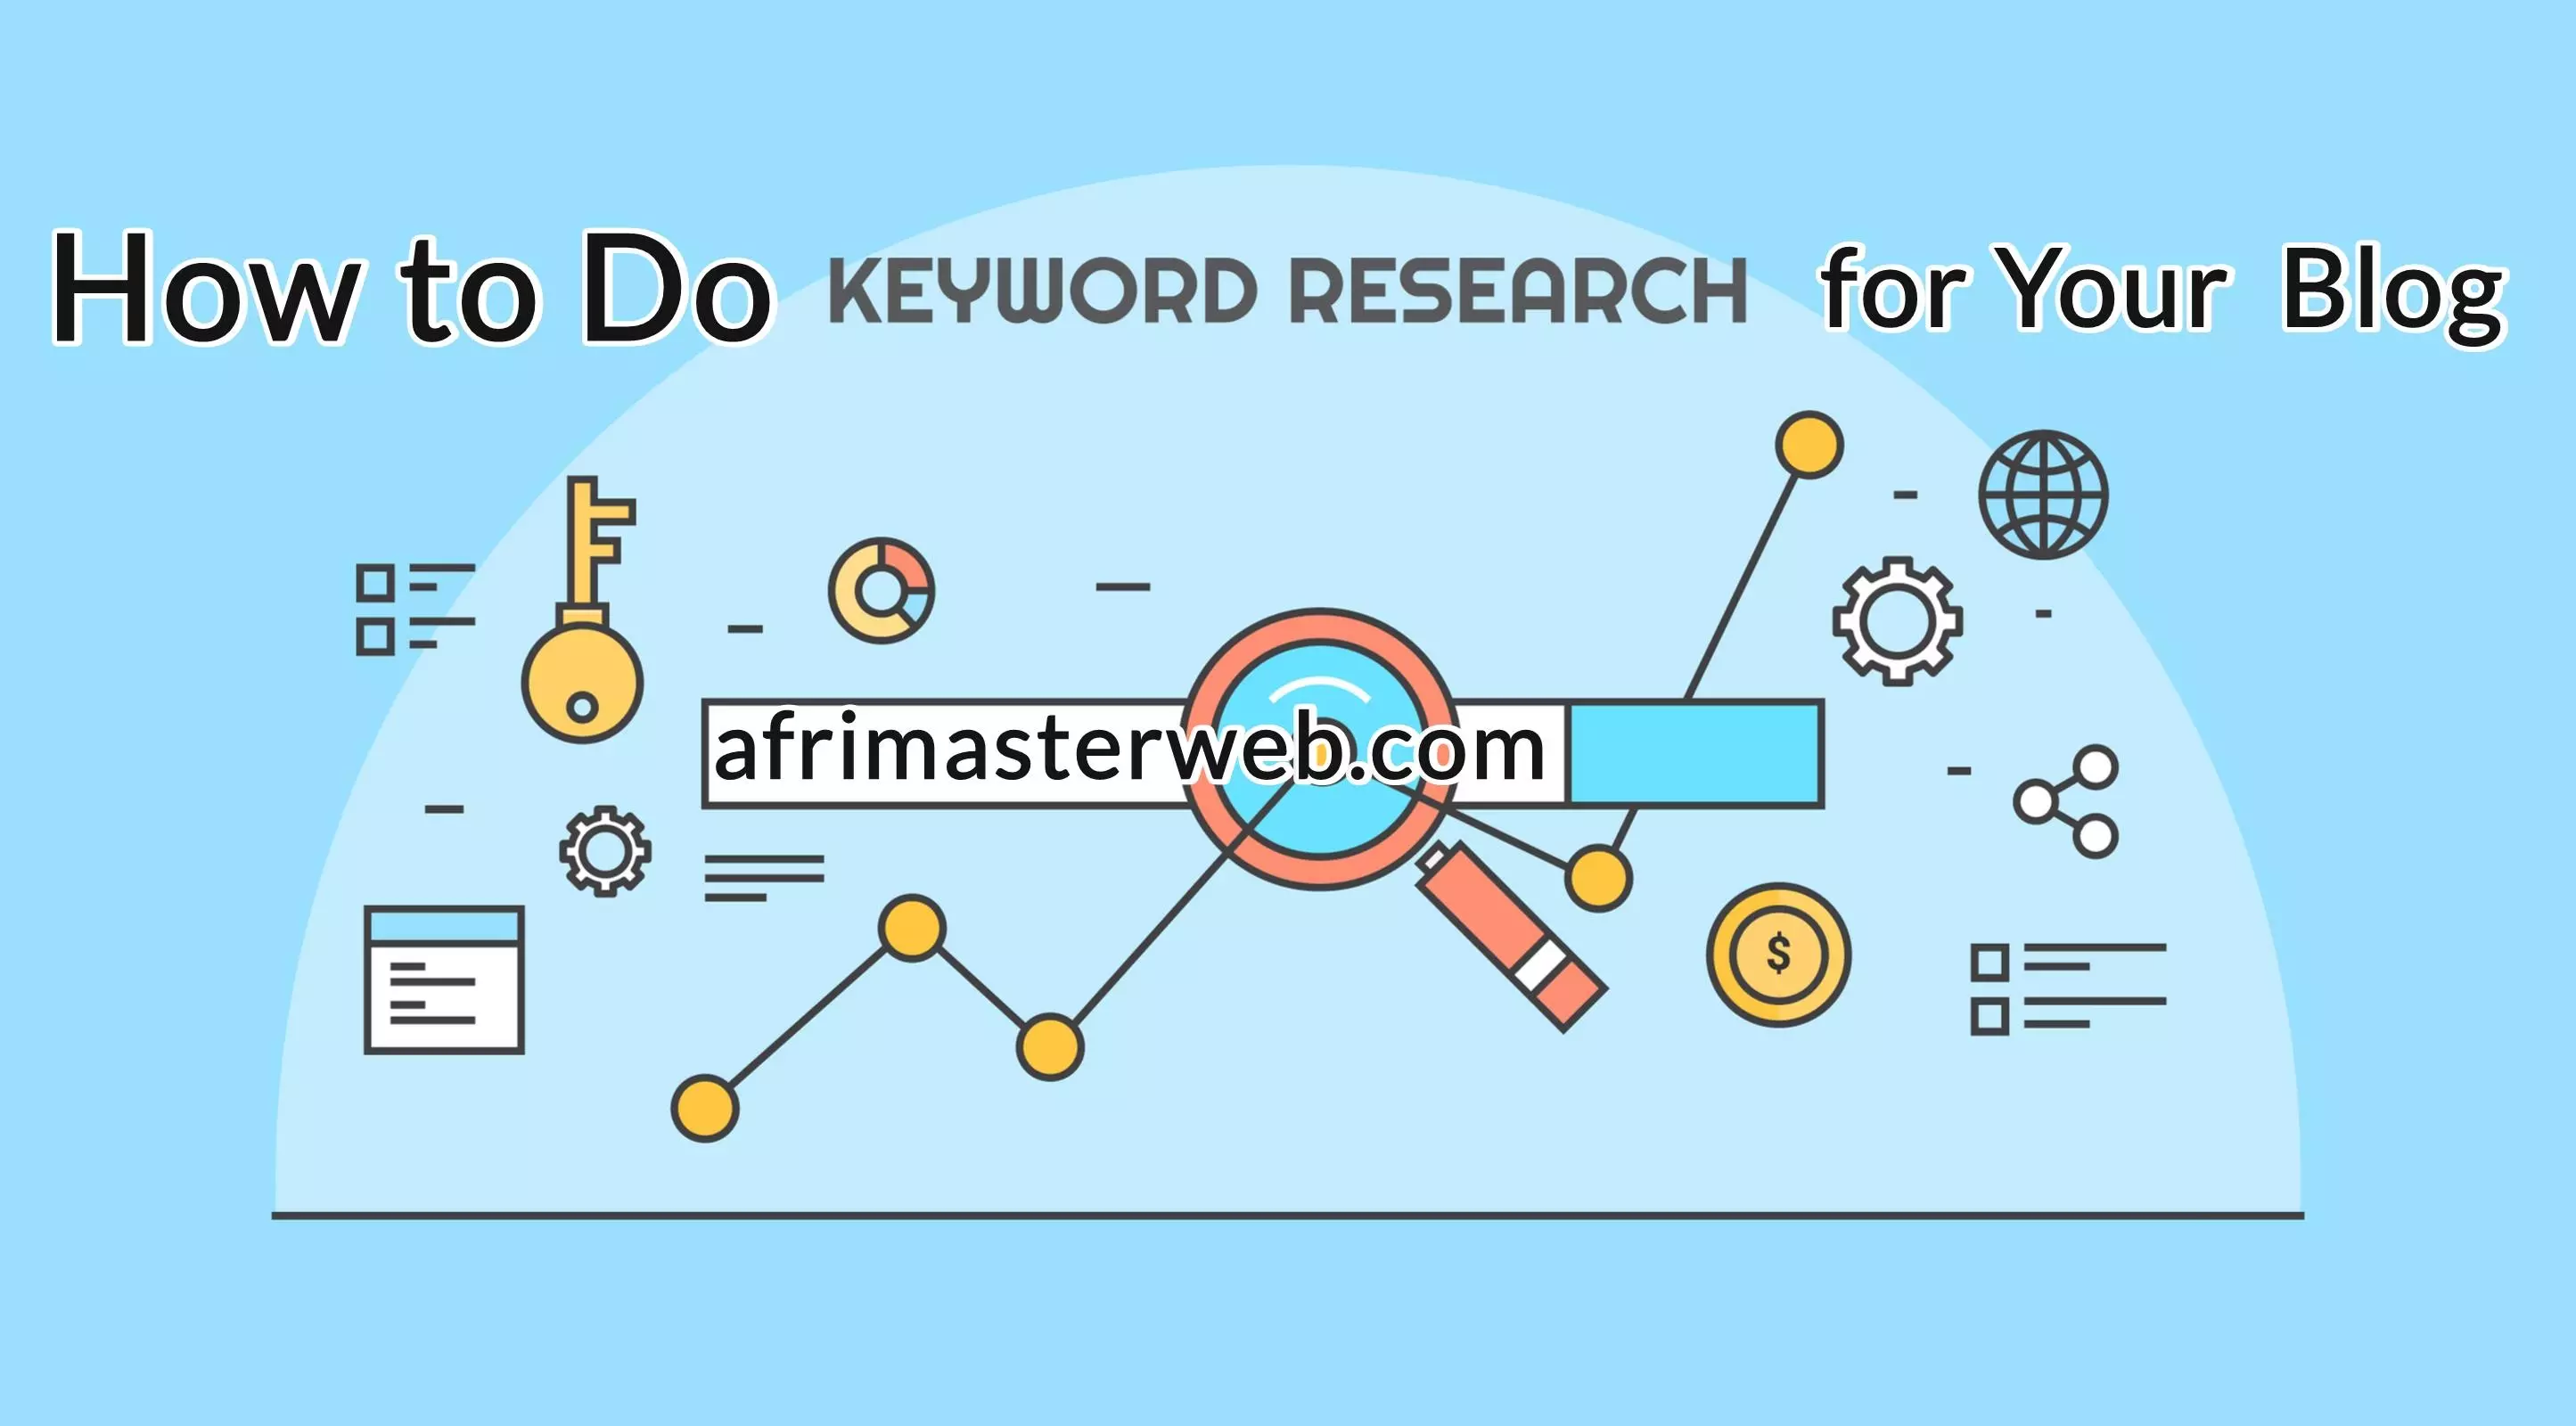 How to Do Keyword Research for Your Blog or website